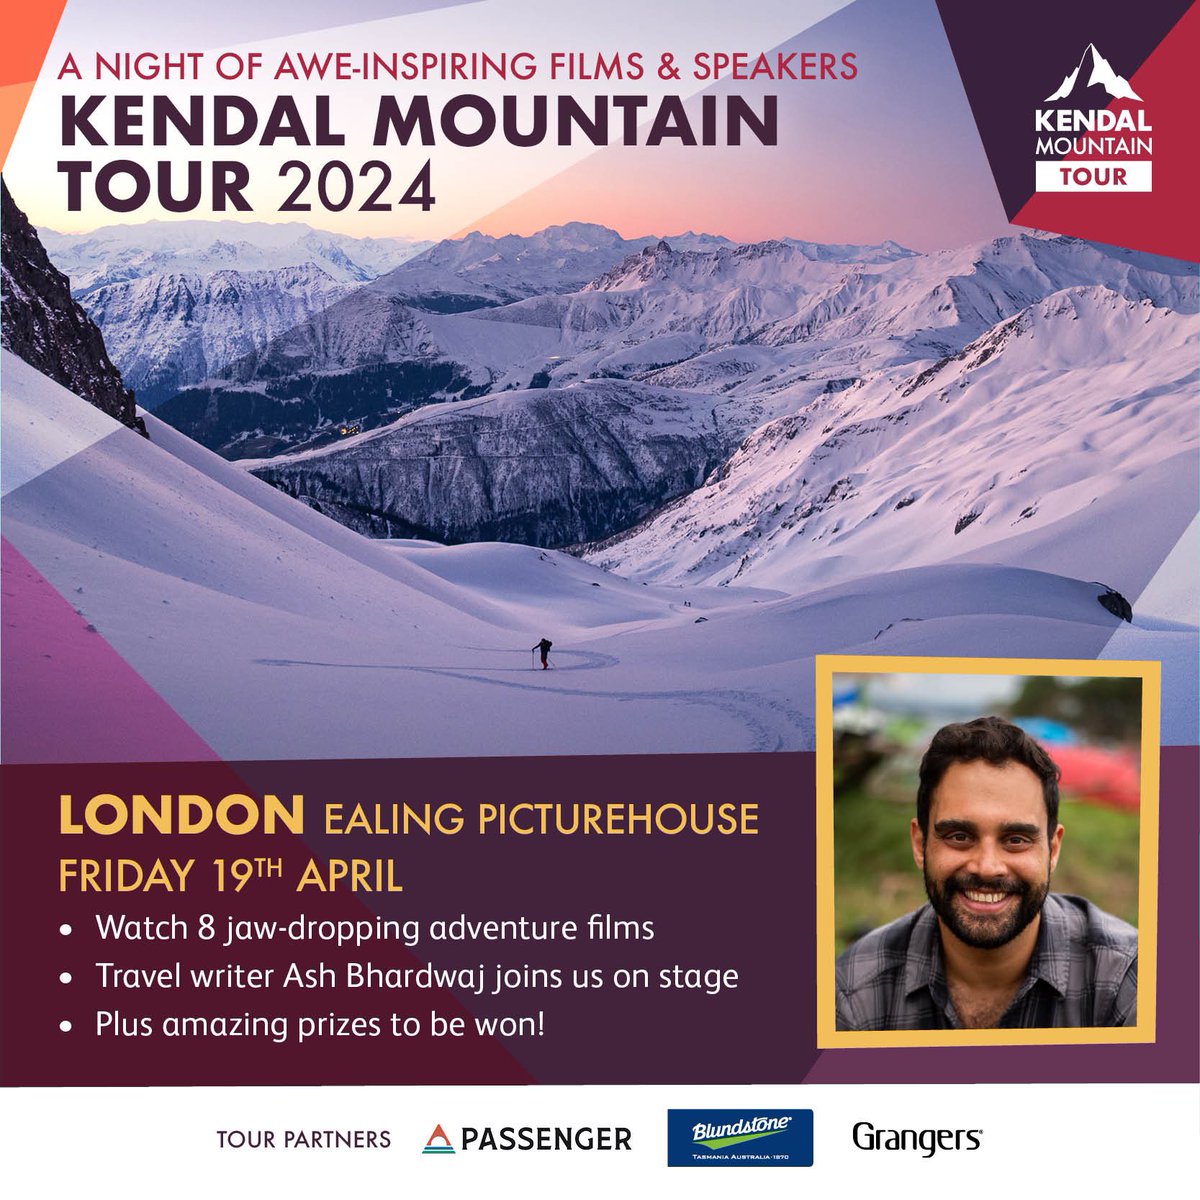 Don't forget tomorrow's #KendalMountainTour2024 @EalingPH 🏔️ @AshBhardwaj will be discussing our motivations for travel with award-winning films & journeys through stunning landscapes! #WhyWeTravel Tickets here 👉 ow.ly/eIUx50Rh4HI